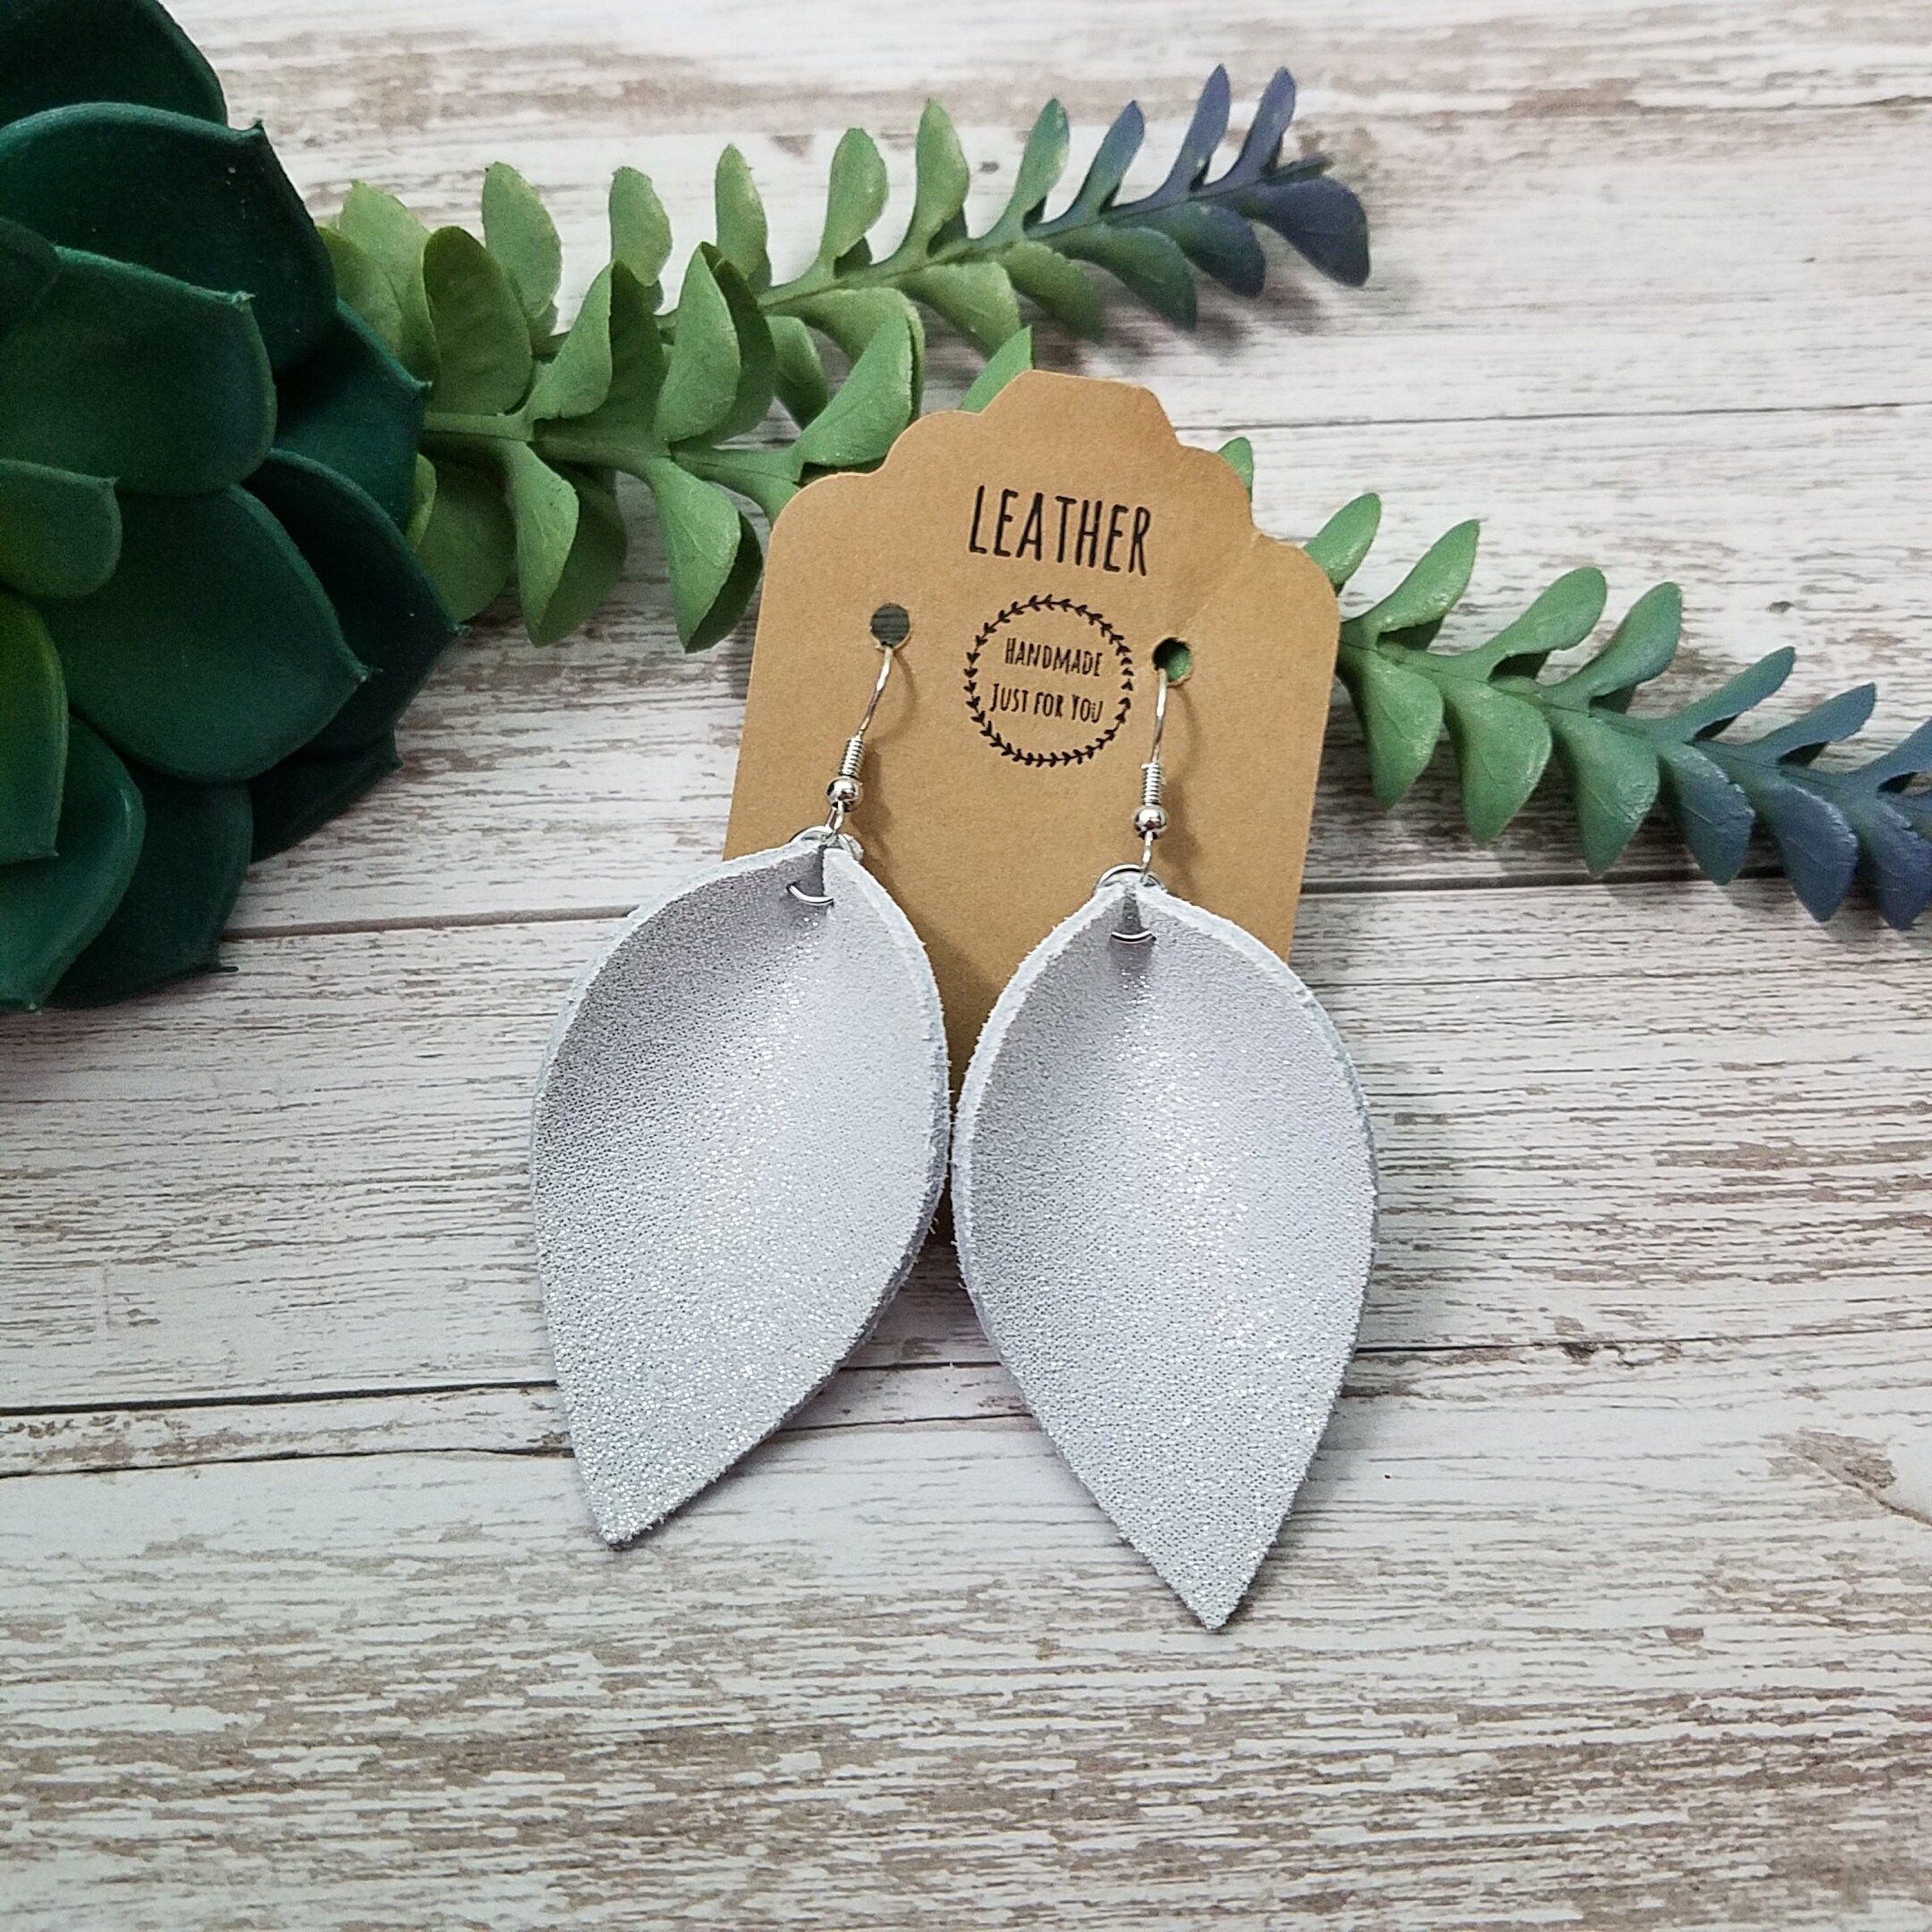 White Birch Small Leather Leaf Earrings Cream - Starlet